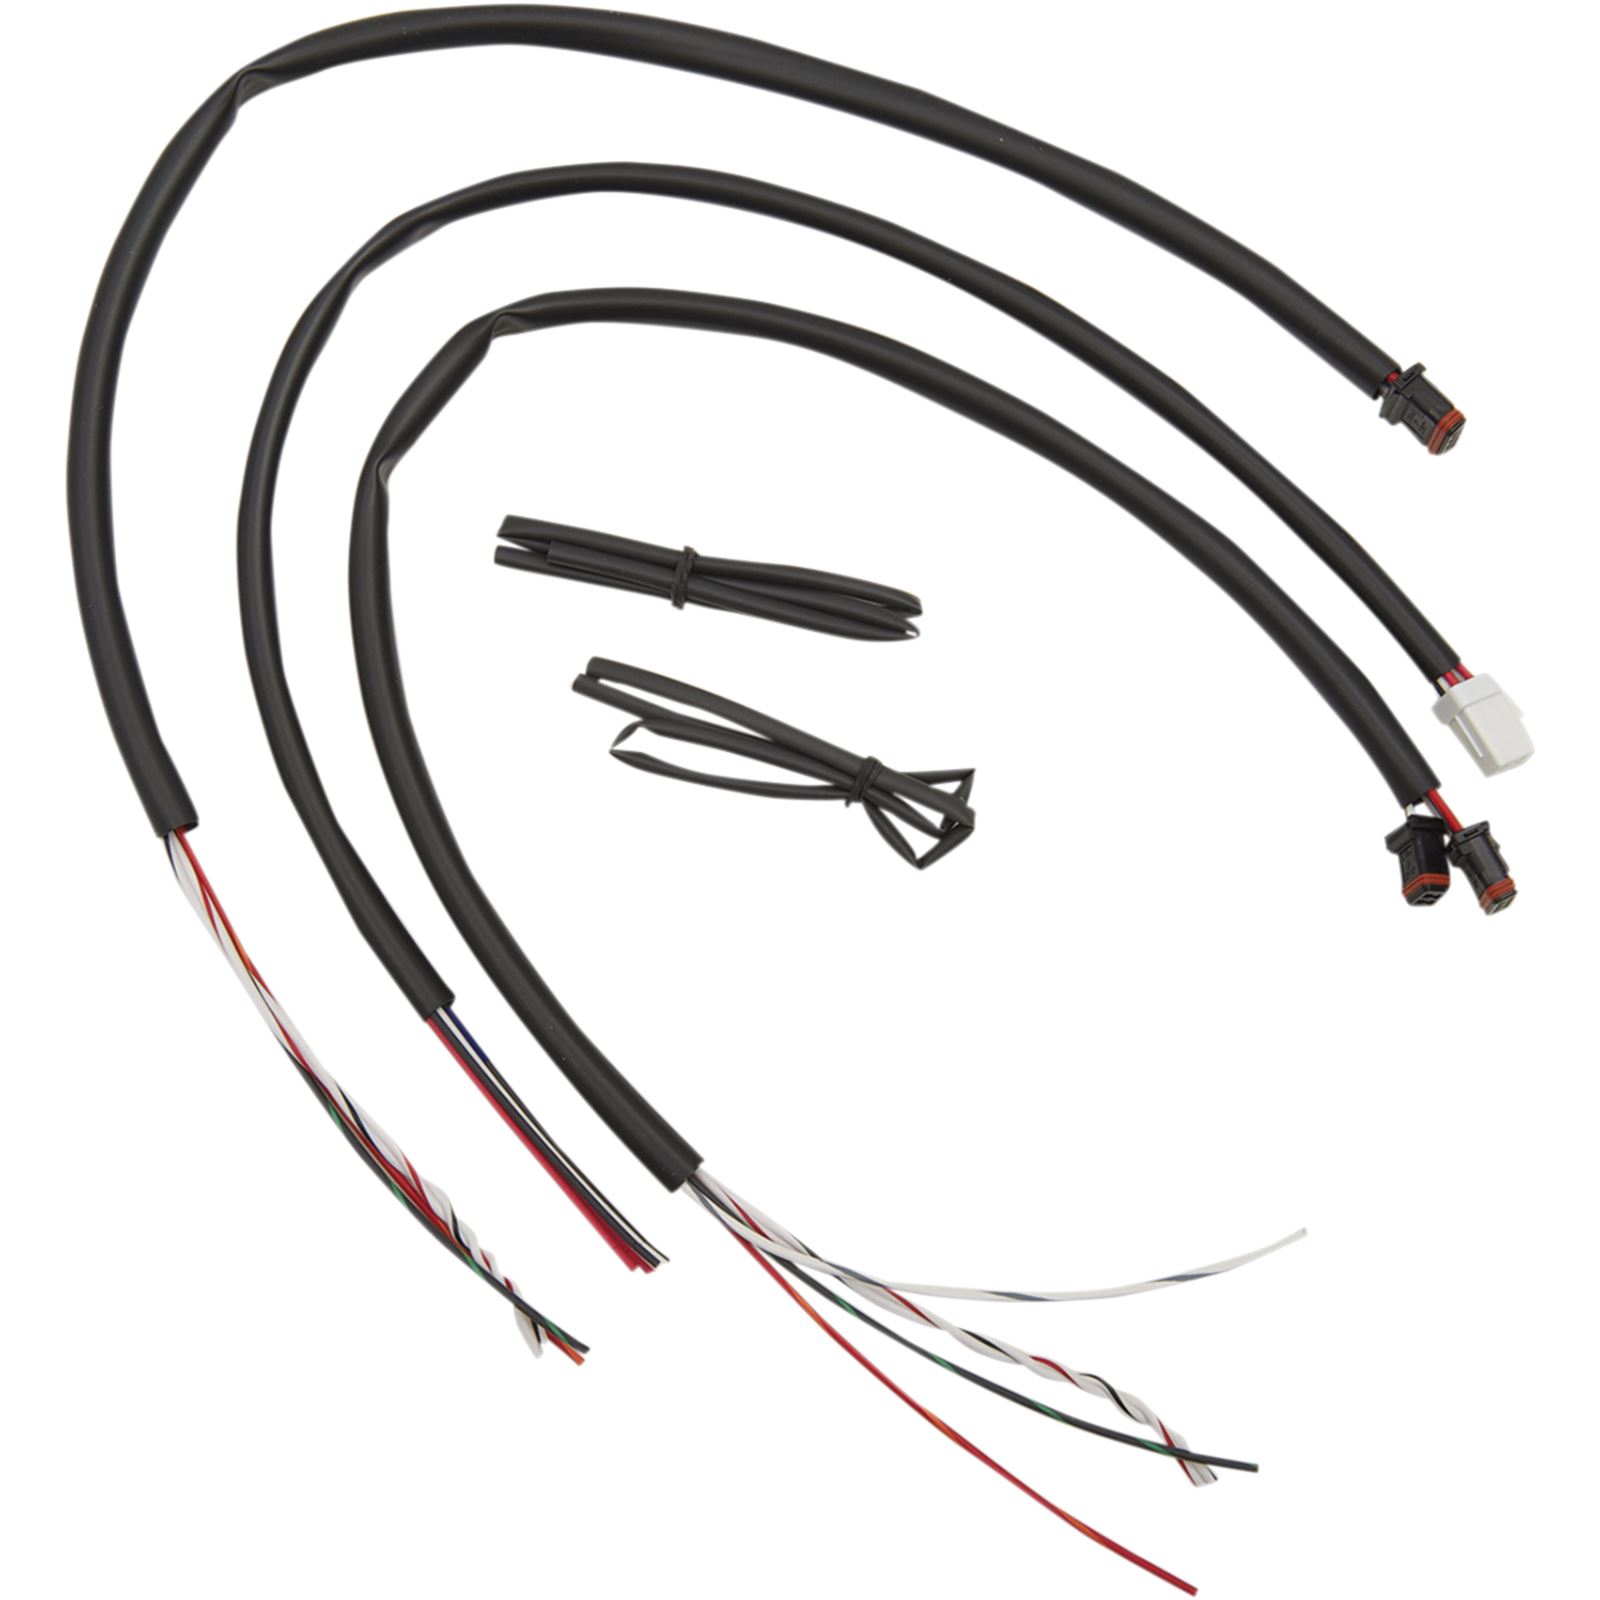 LA Choppers Handle Bar Extension Wiring Kit - For Harley Davidson